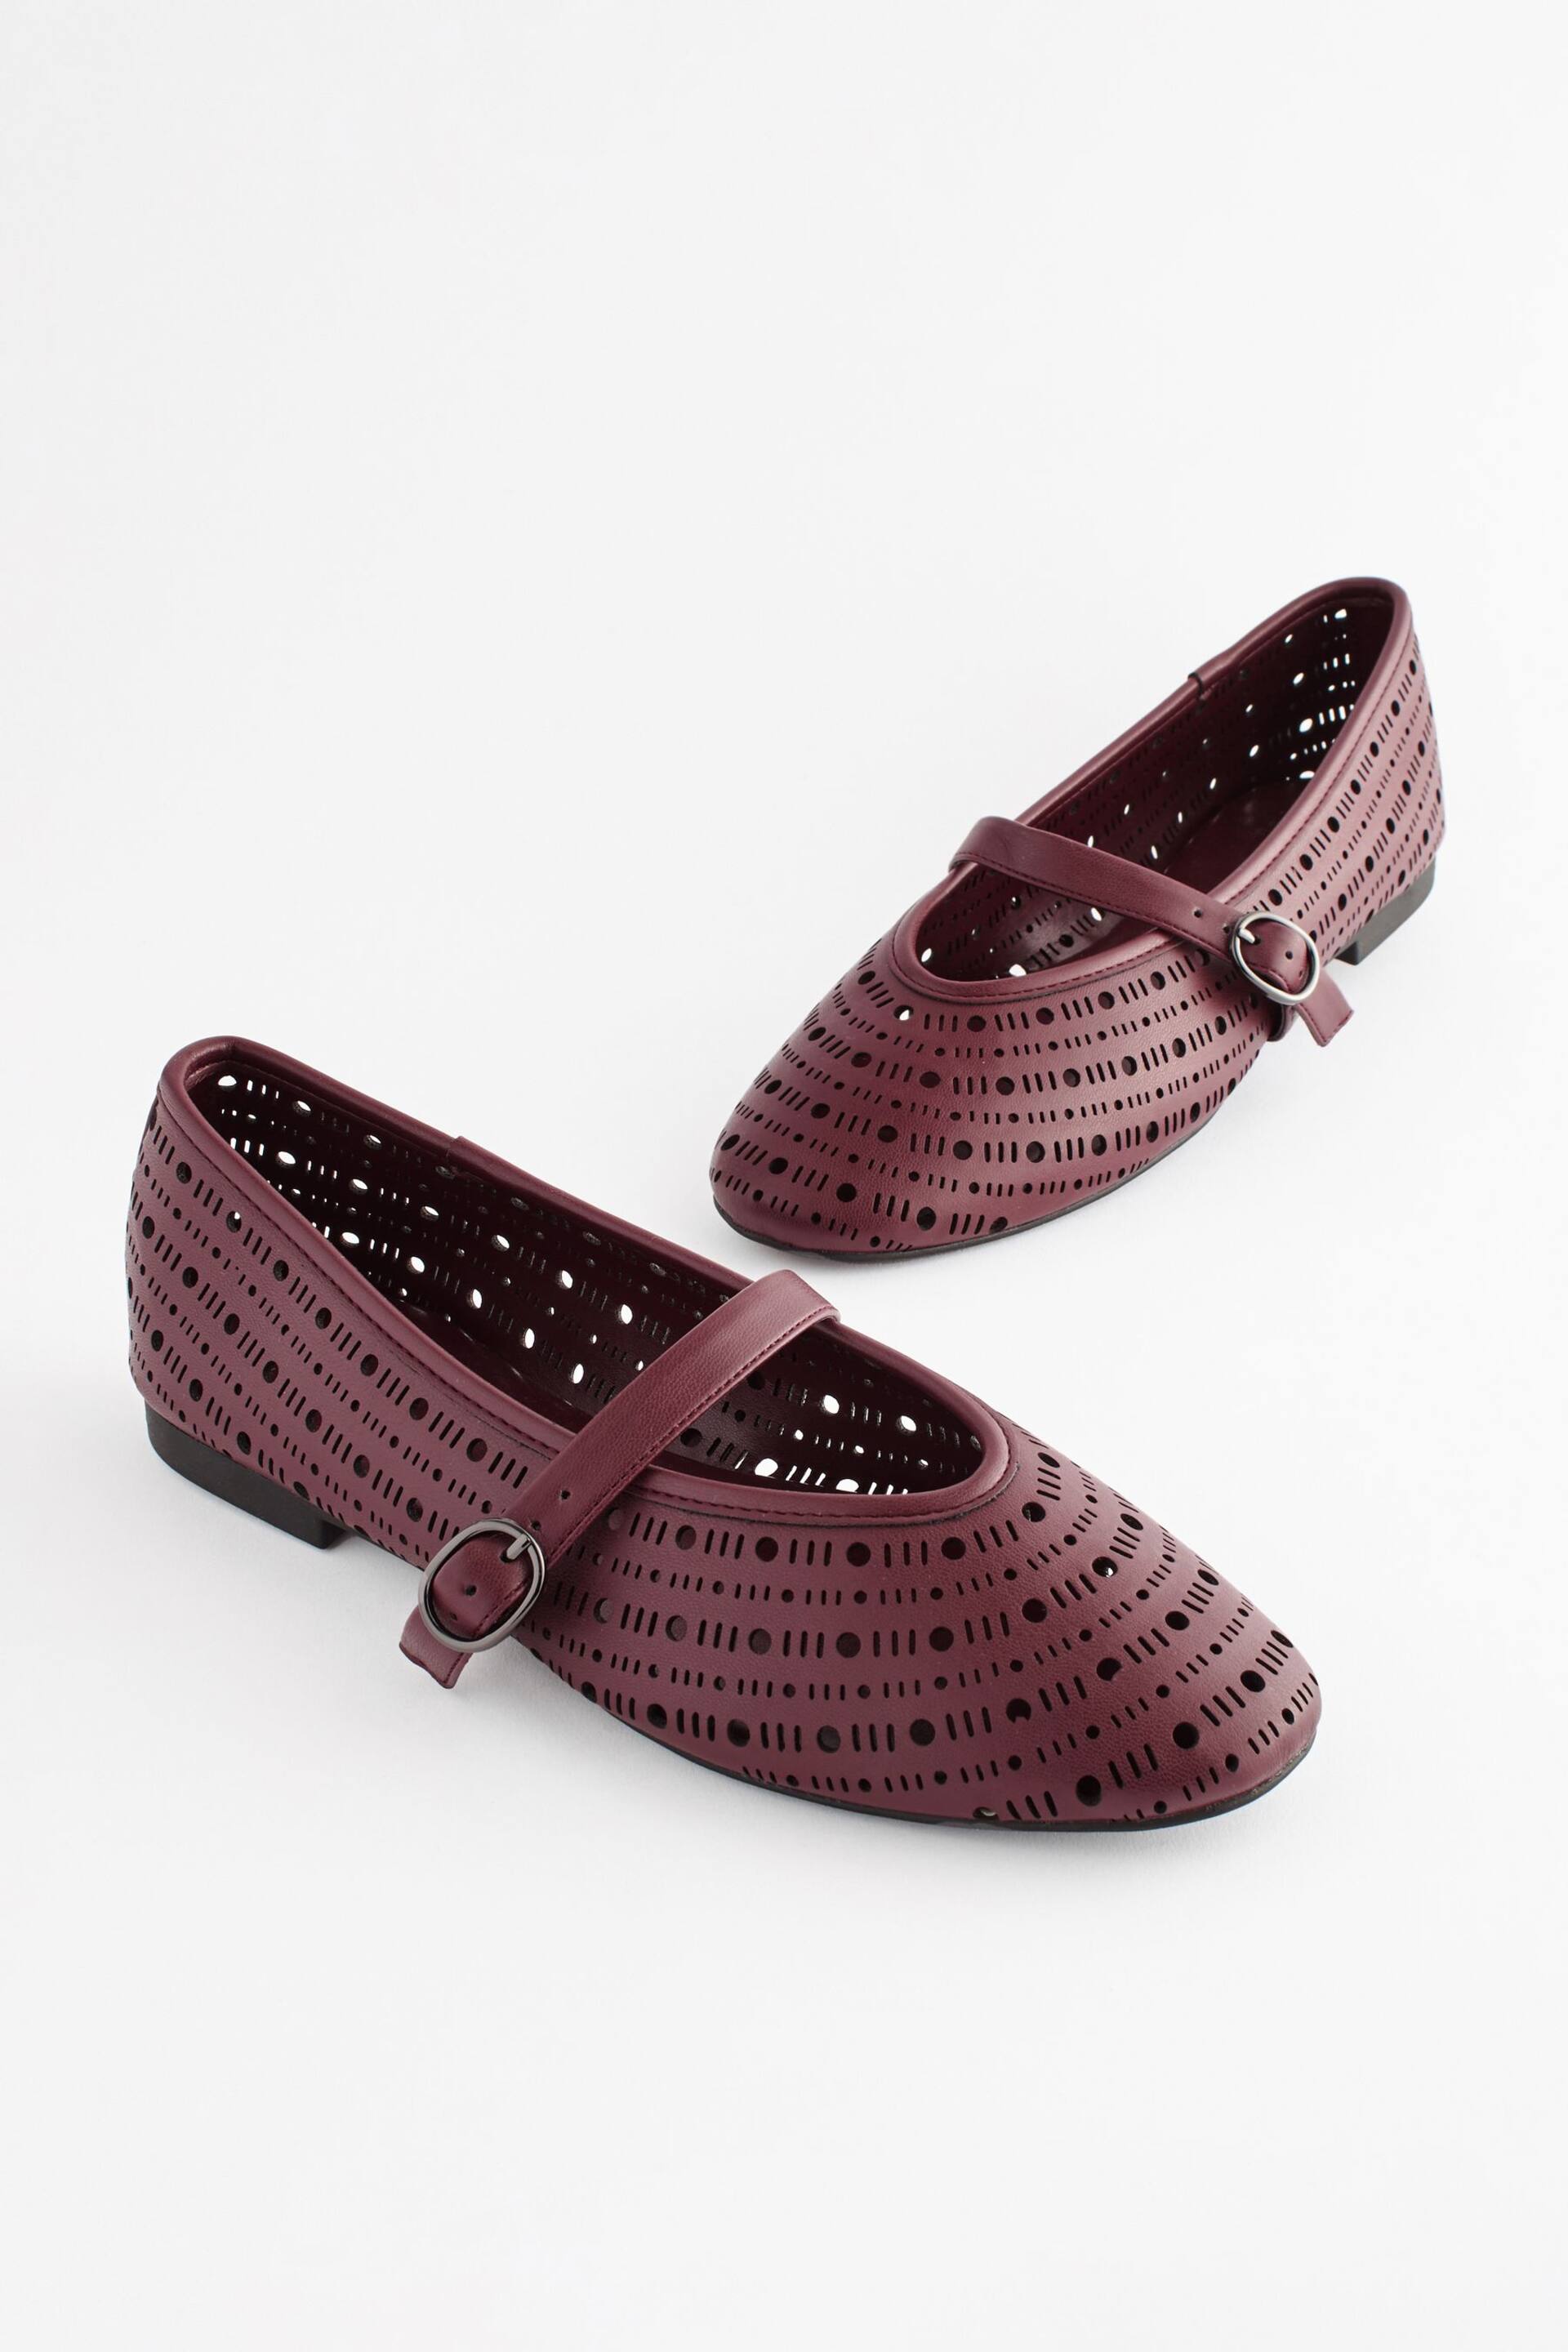 Berry Red Forever Comfort® Lasercut Mary Jane Shoes - Image 2 of 5